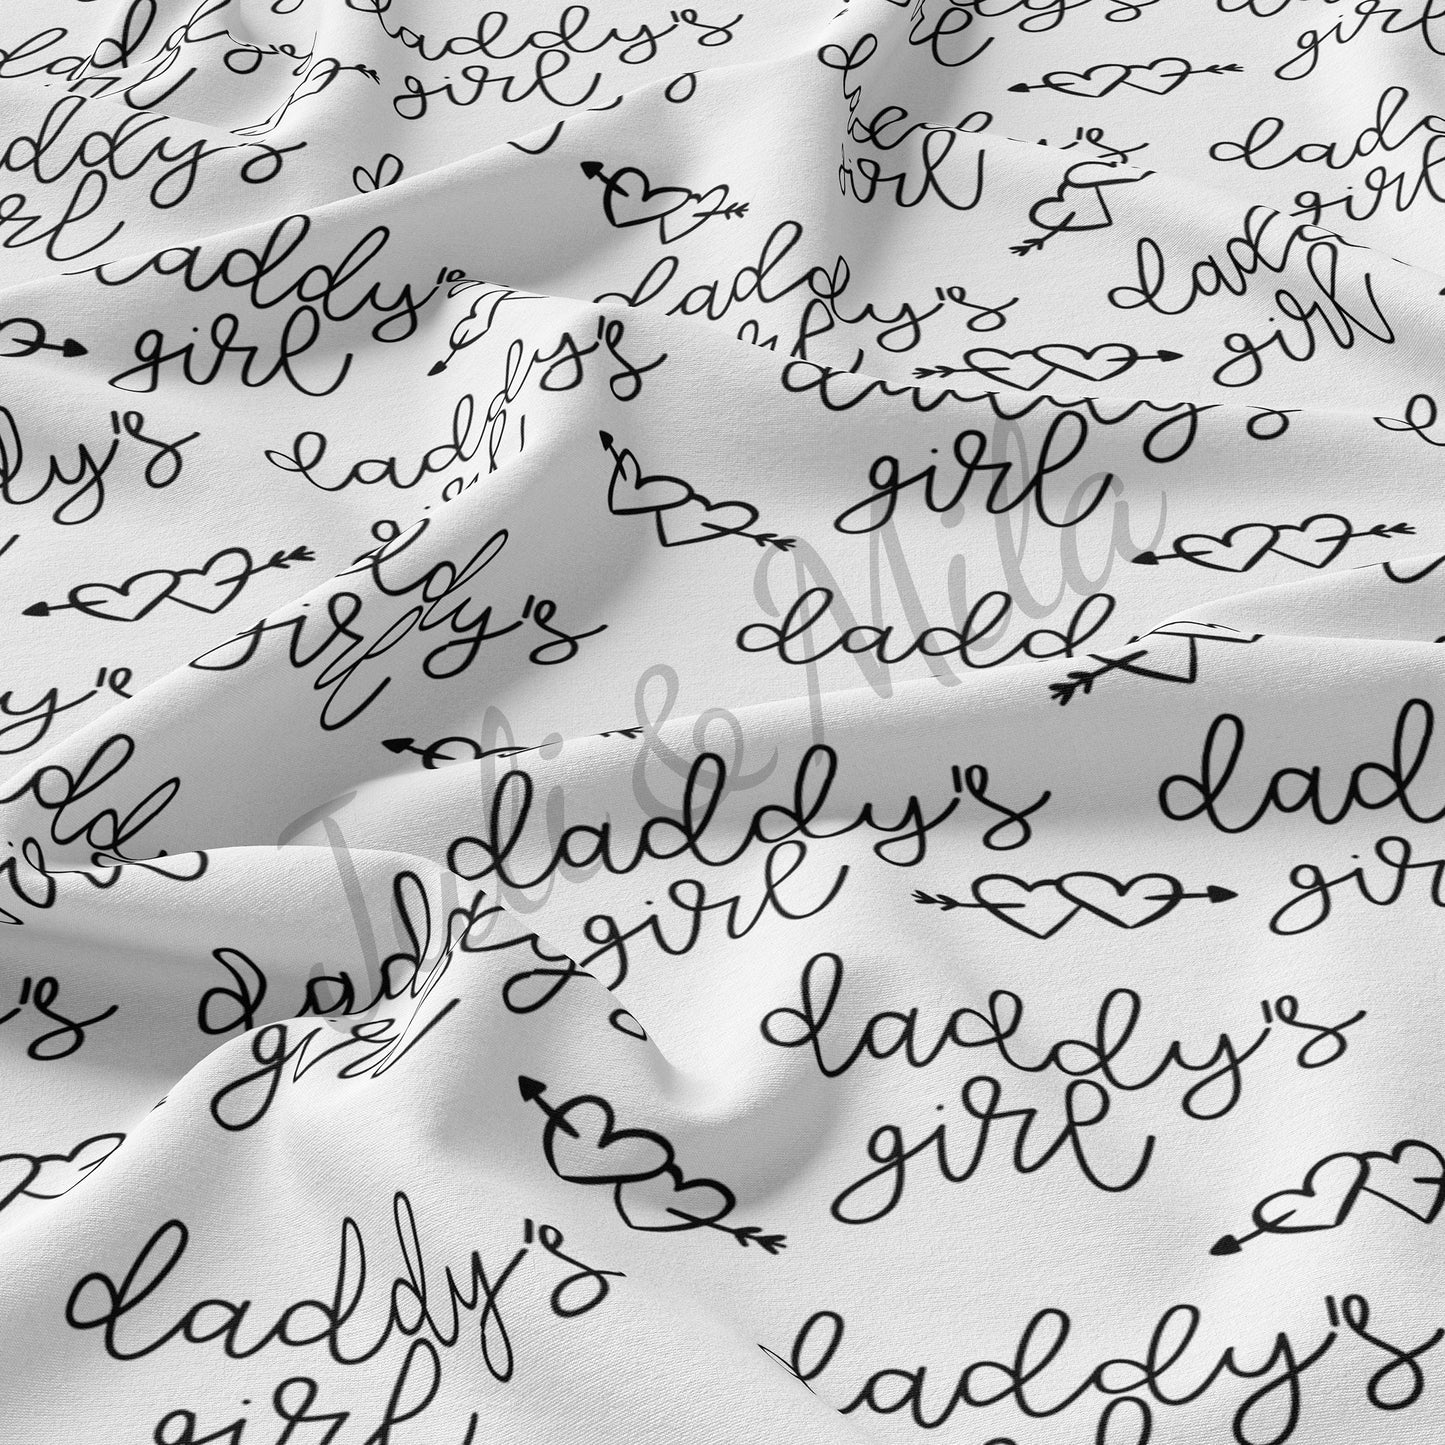 DBP Fabric Double Brushed Polyester Fabric Daddy's Girl DBP43